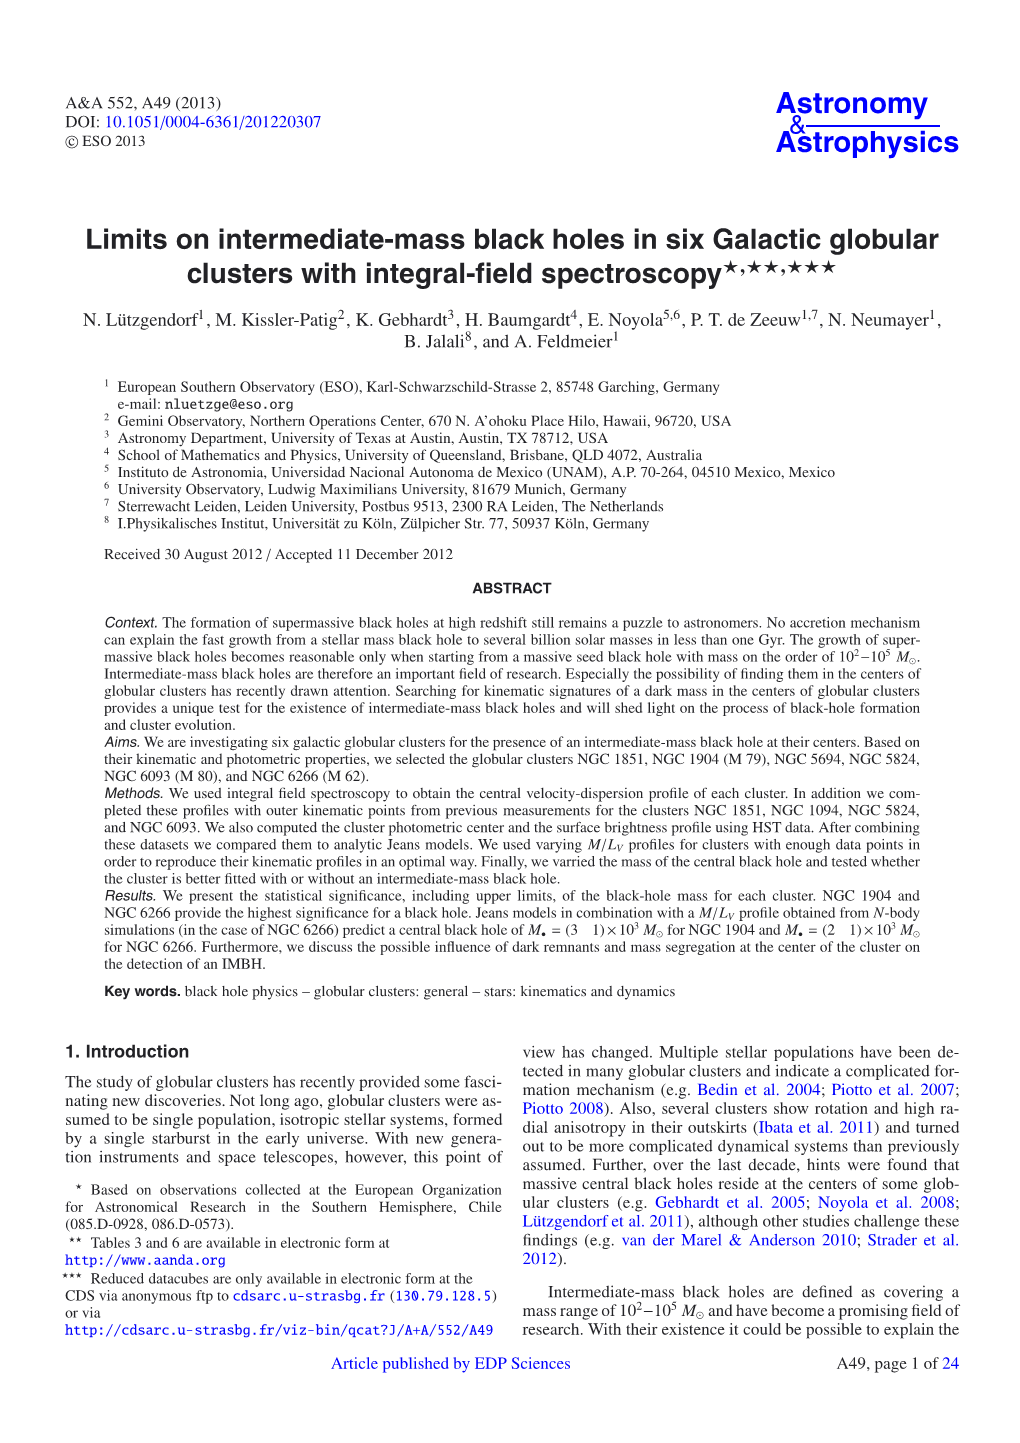 Limits on Intermediate-Mass Black Holes in Six Galactic Globular Clusters with Integral-ﬁeld Spectroscopy�,��,�